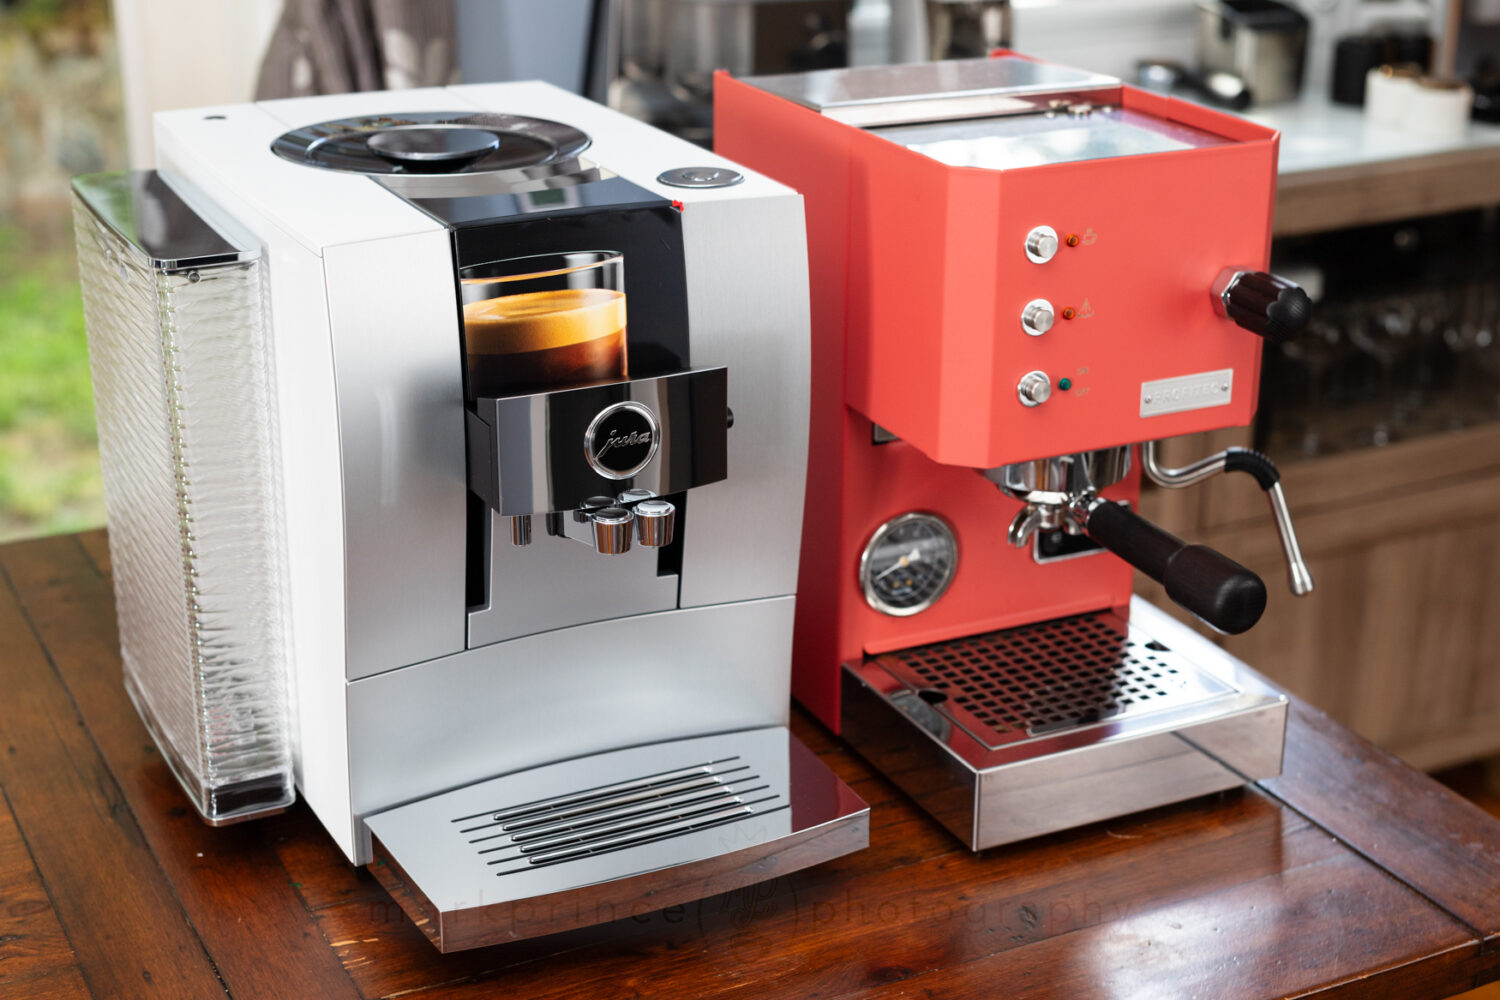 The Jura Z10 next to a Profitec Go. Both are similar sizes in width; the Z10 is deeper by about 10cm.